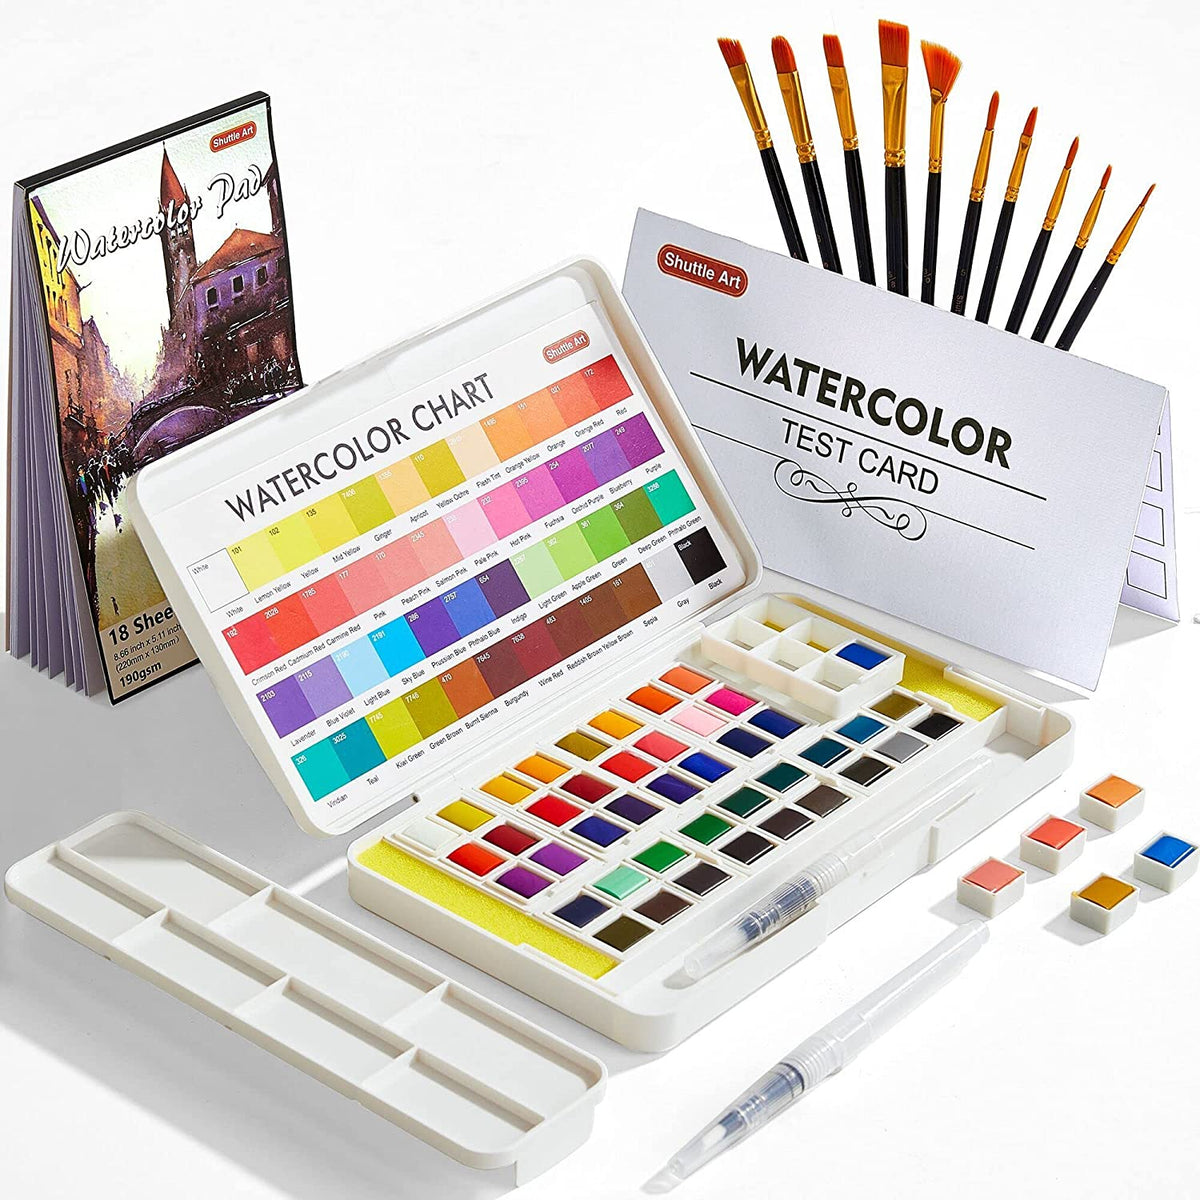 Real Waterbrush Set - 48 Watercolor Paint Markers, 1 Refillable